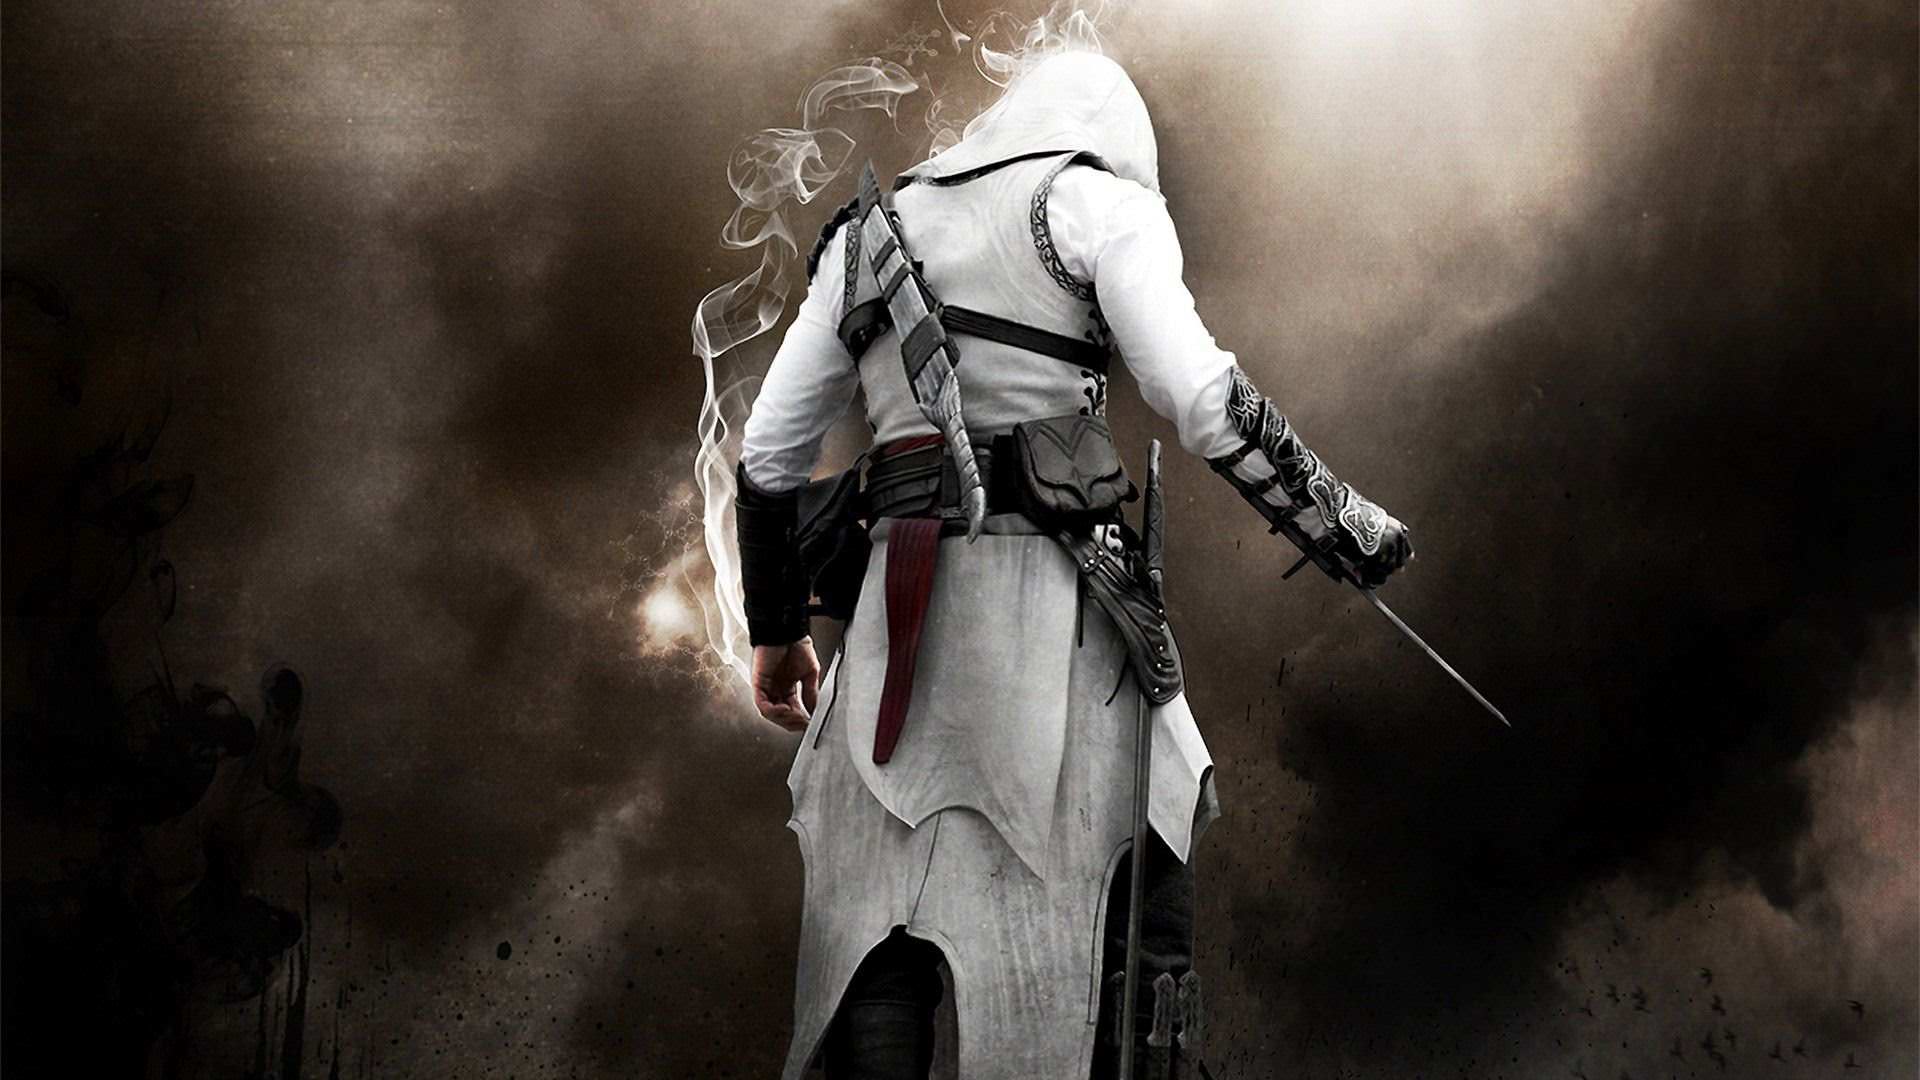 Assassin’s Creed Movie Shots From The Set Leaked!